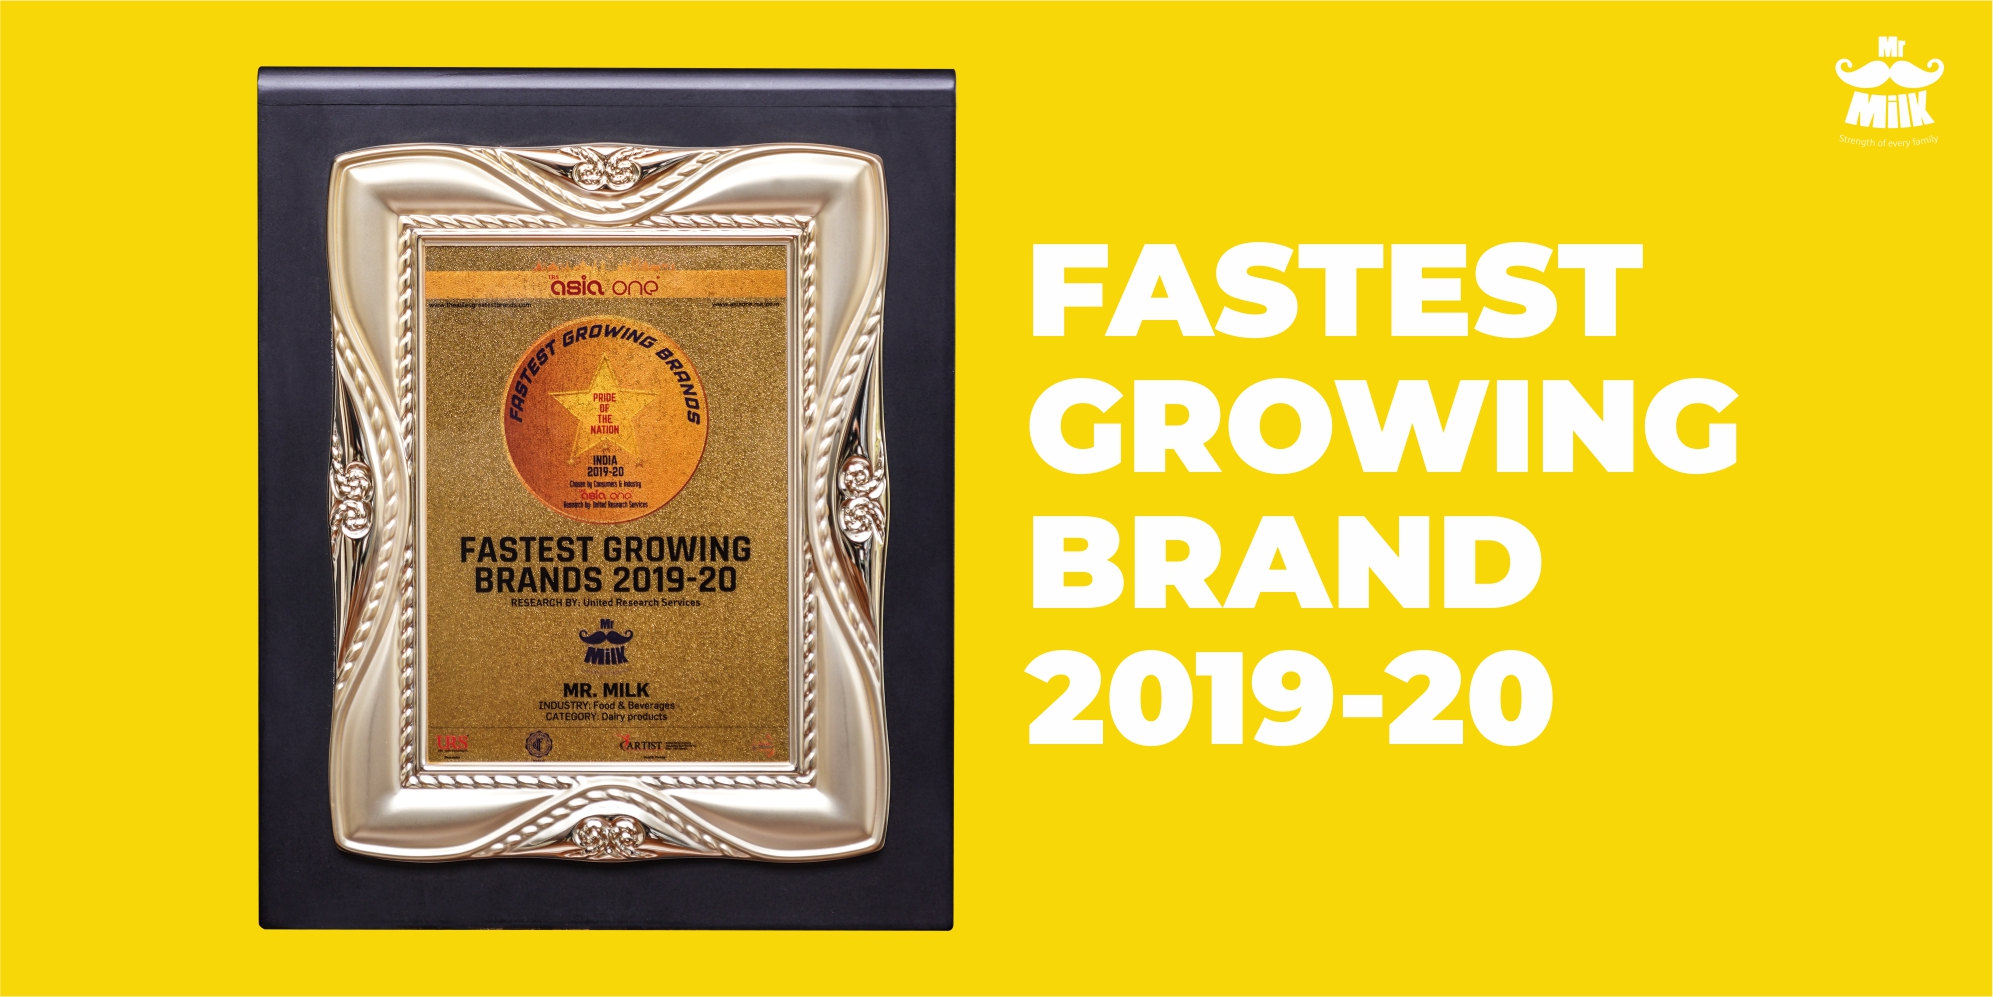 Fastest Growing Brand 2019-20